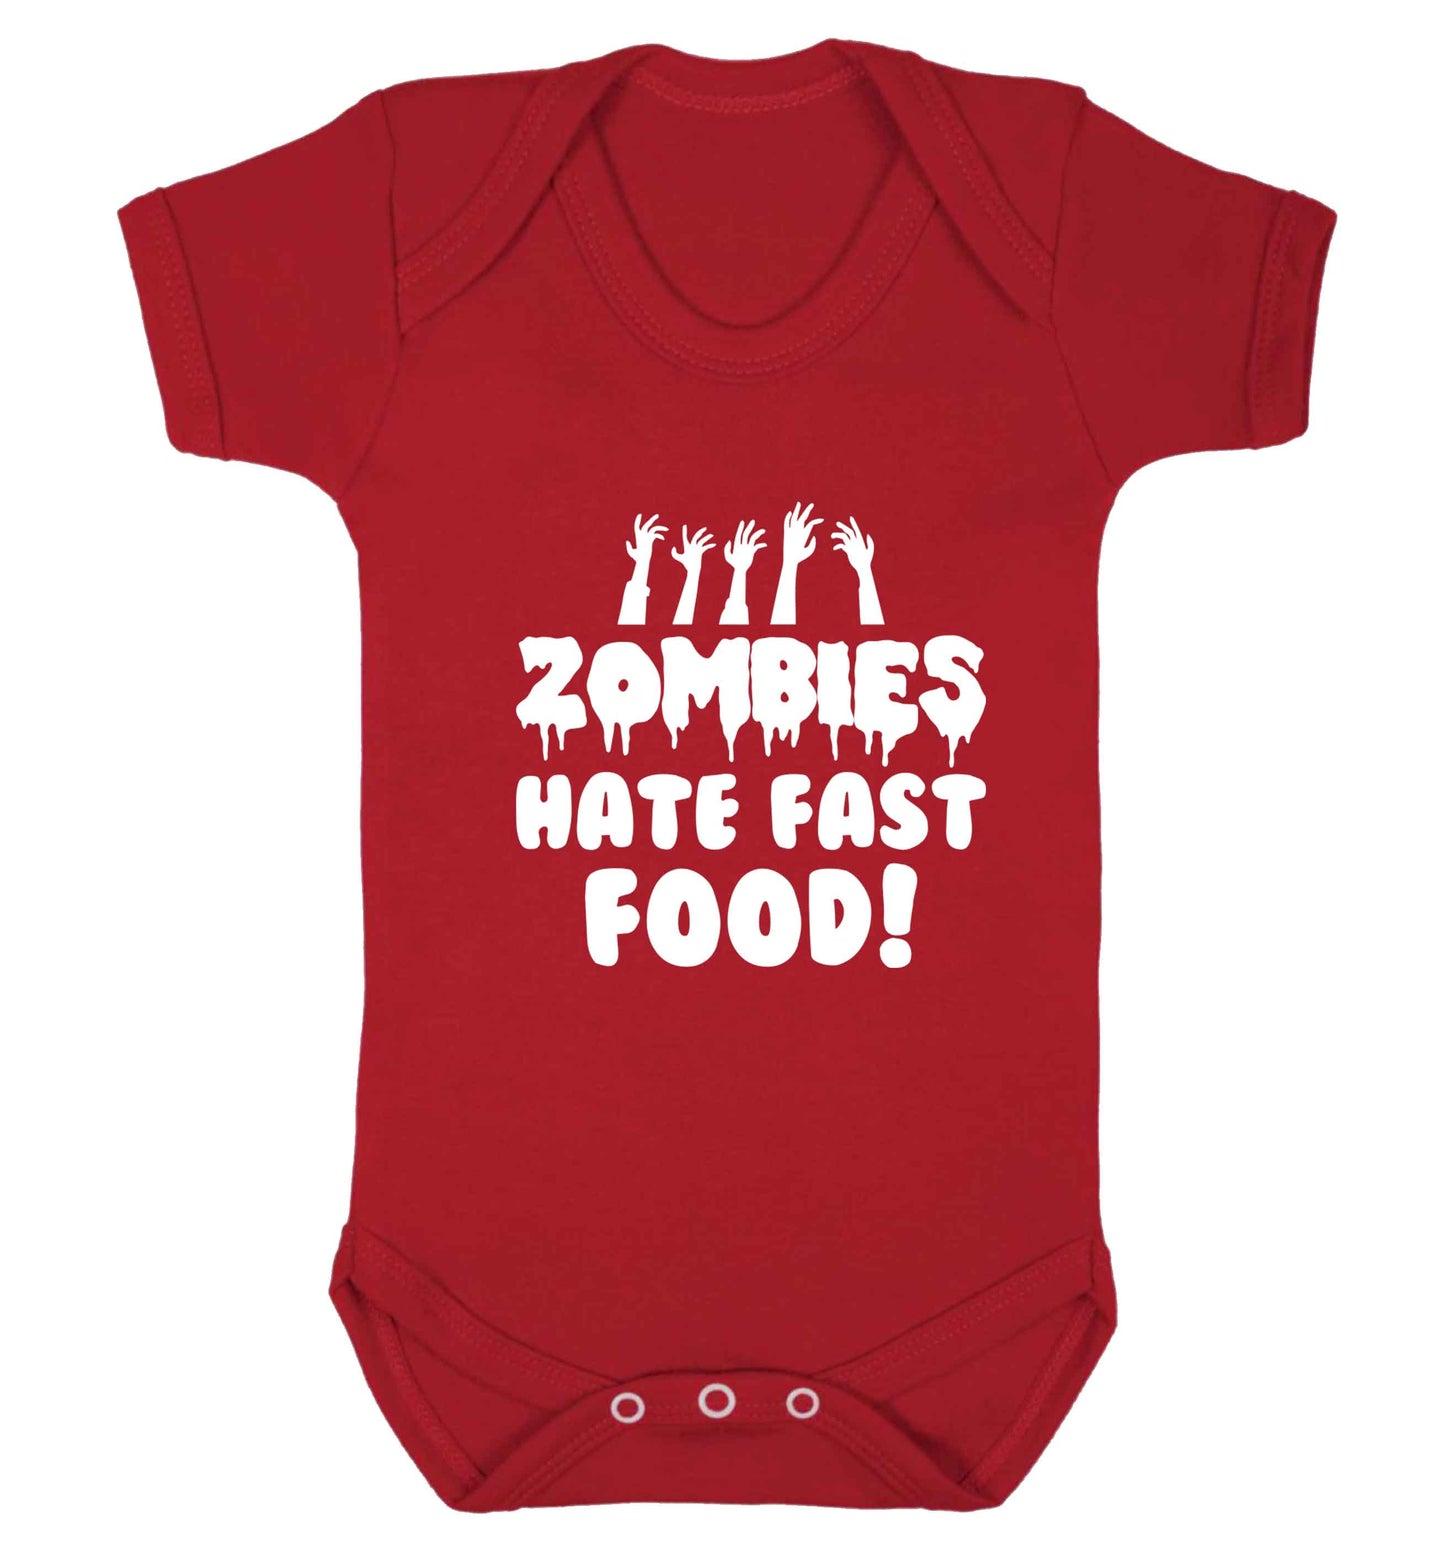 Zombies hate fast food baby vest red 18-24 months